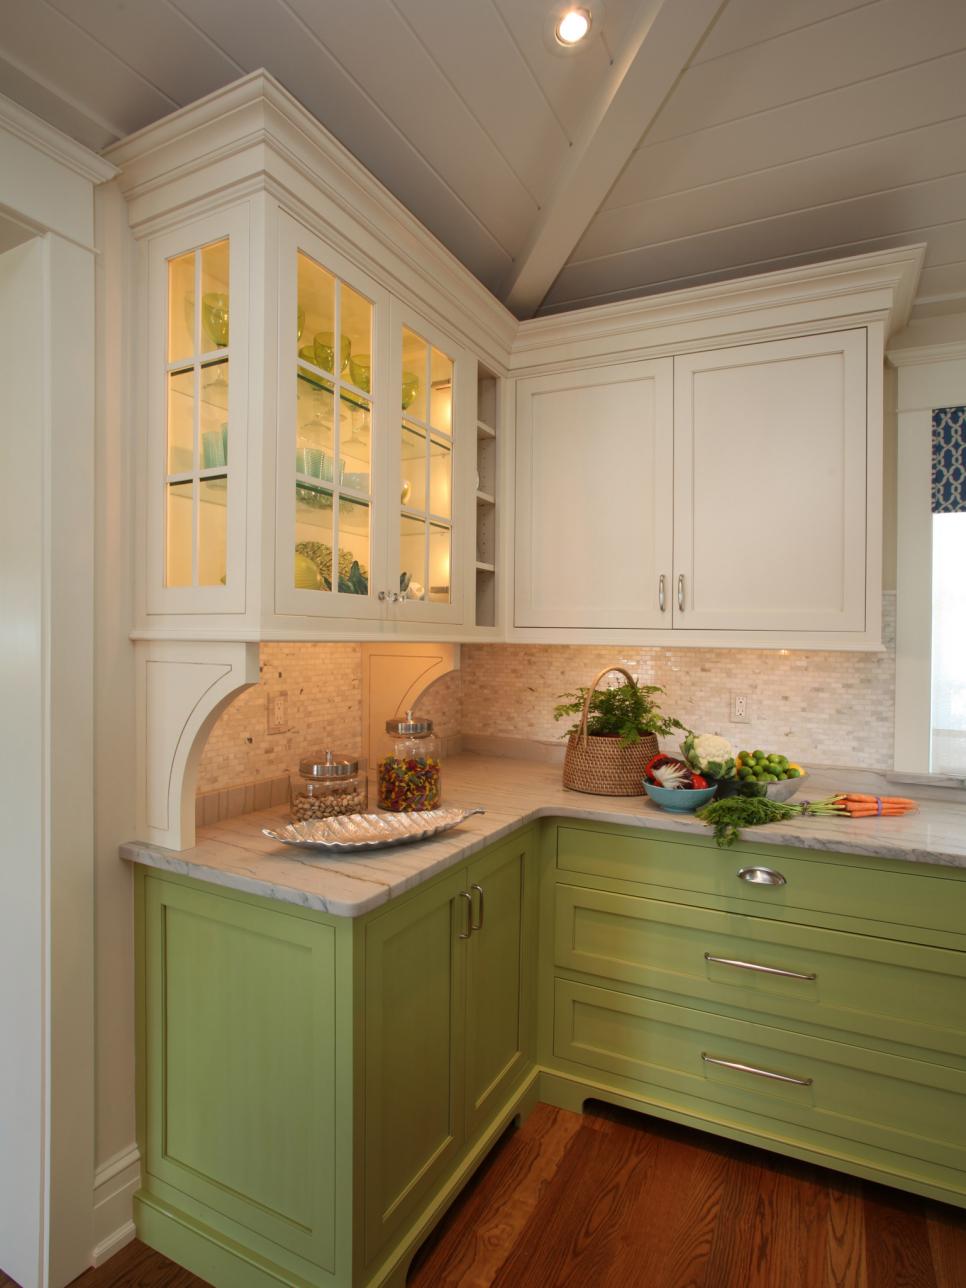 Kitchen With Colored Cabinetry and Hardwood Floor